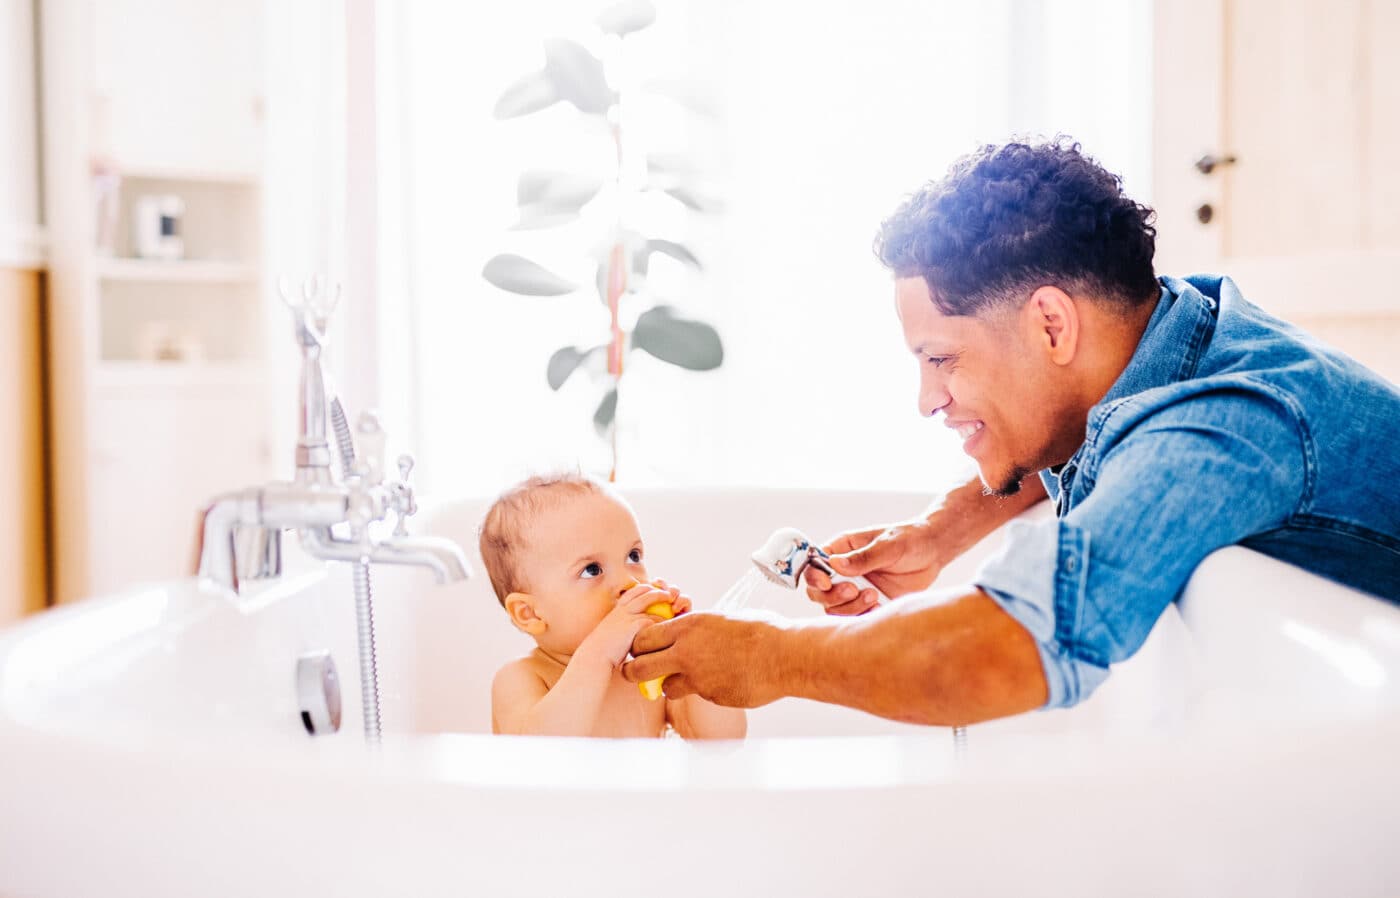 Bedtime routines that begin with a bath can cue your baby to what is to come and help them prepare for sleep.